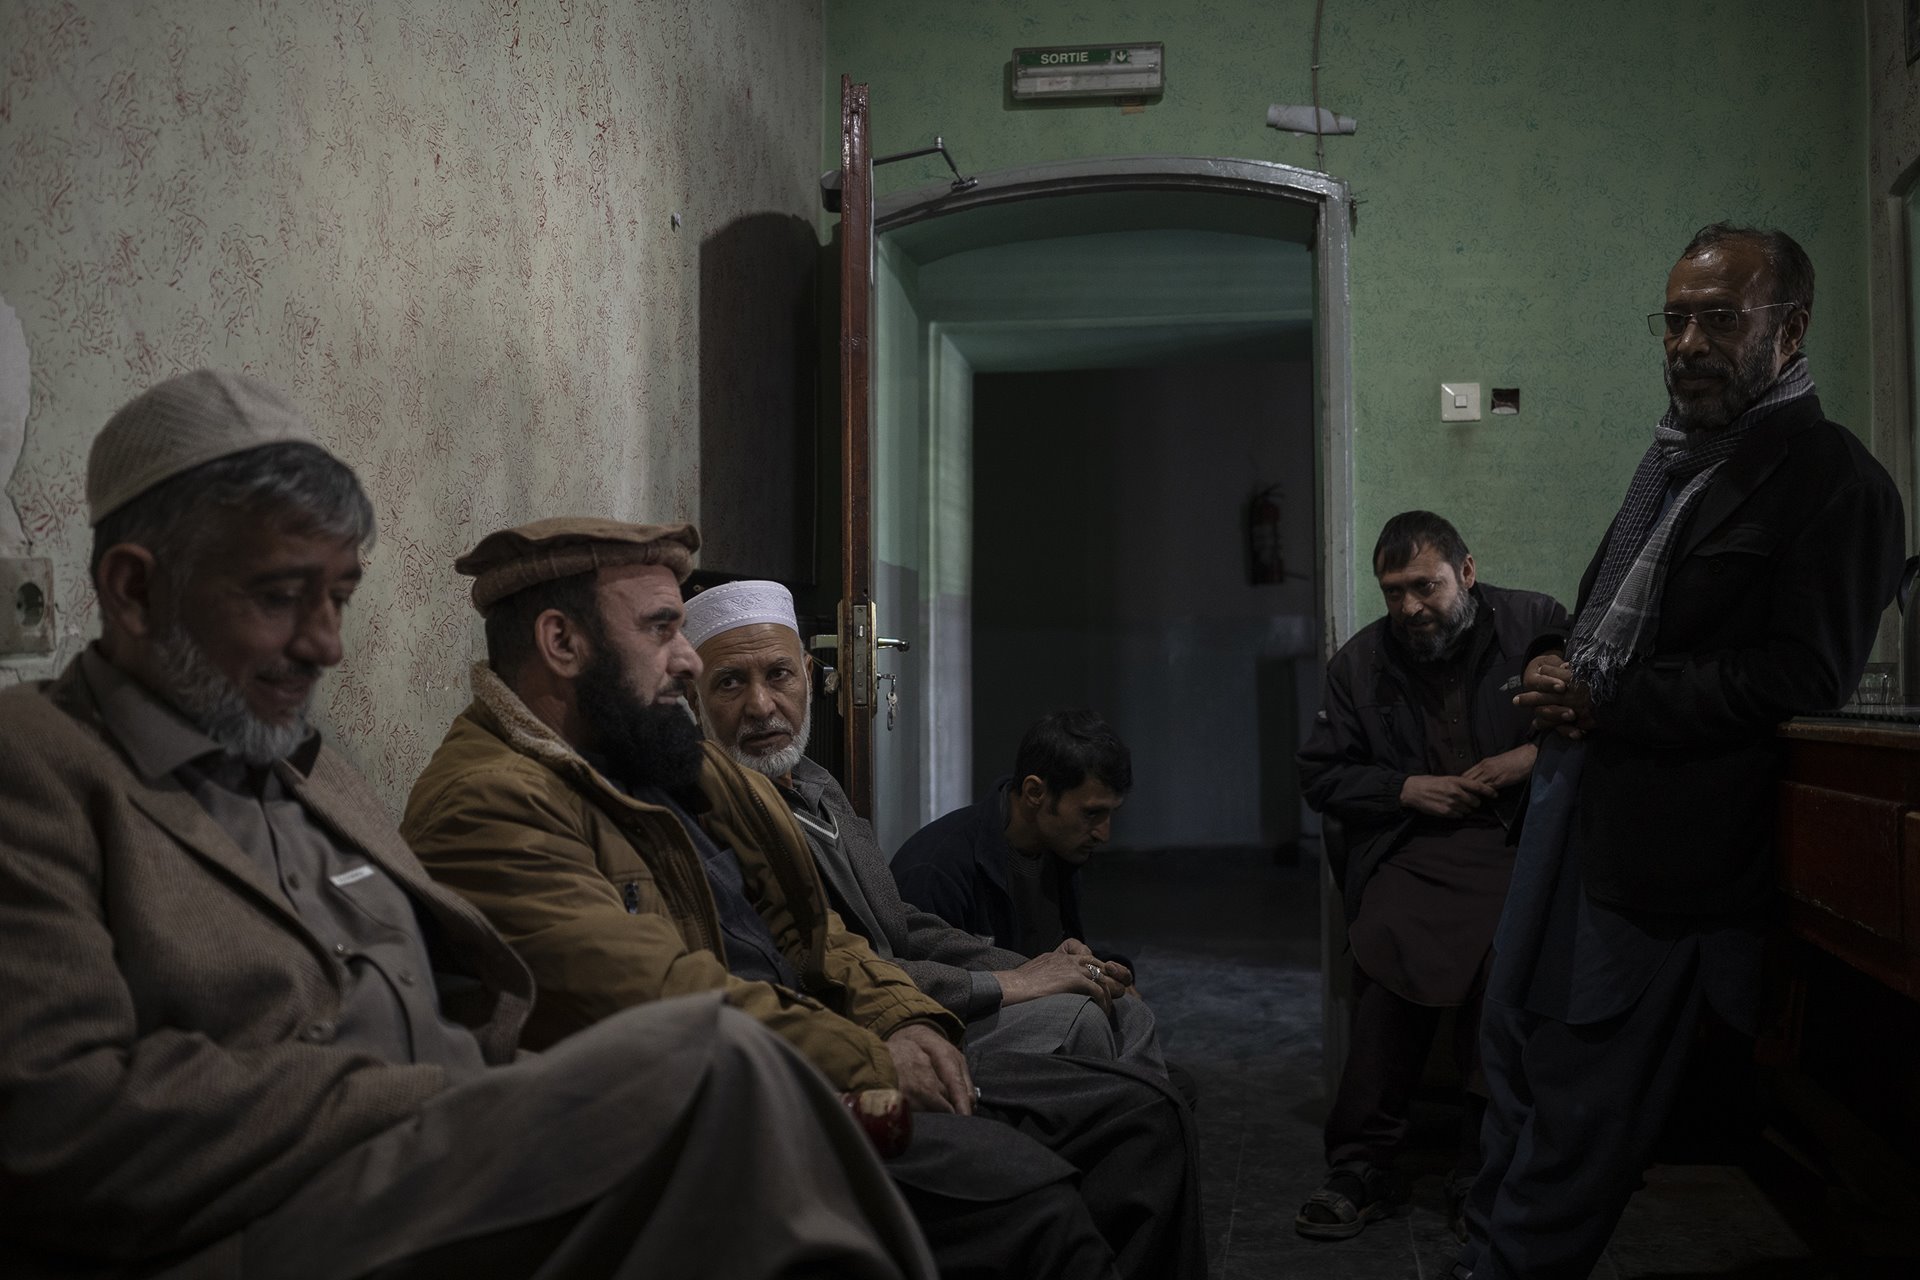 Staff members sit inside the ticket office of the Ariana Cinema in Kabul, Afghanistan. Nearly three months after the Taliban closed the government-owned cinema, the staff still arrive for work in the hope that they will be paid.